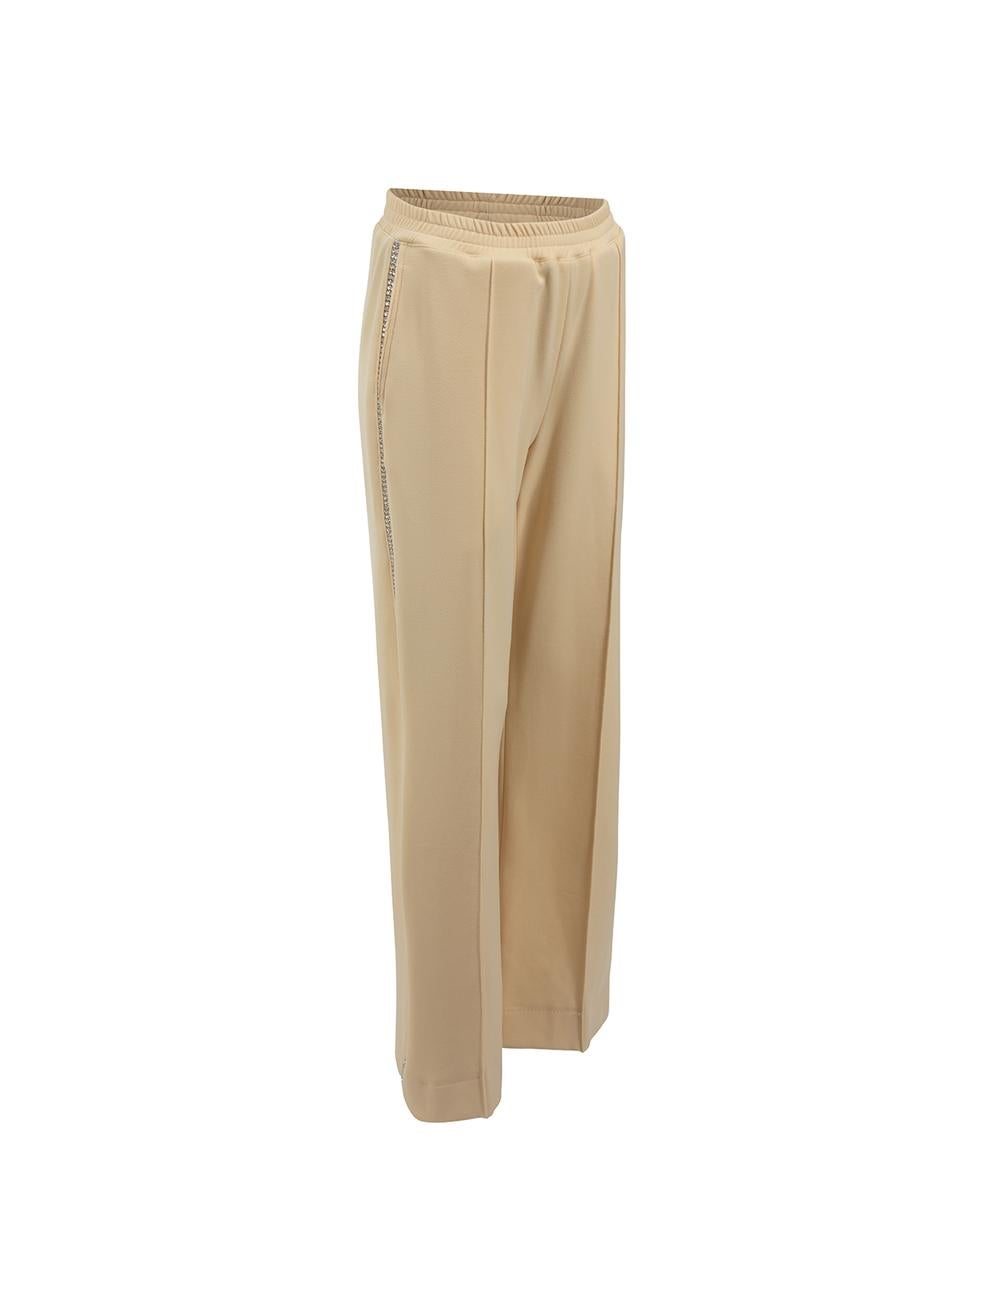 CONDITION is Very good. Minimal wear to trousers is evident. Minimal wear to back leg of trousers where stains is evident. Minor loose thread on the waistband on this used Area designer resale item.



Details


Ecru

Synthetic

Wide leg